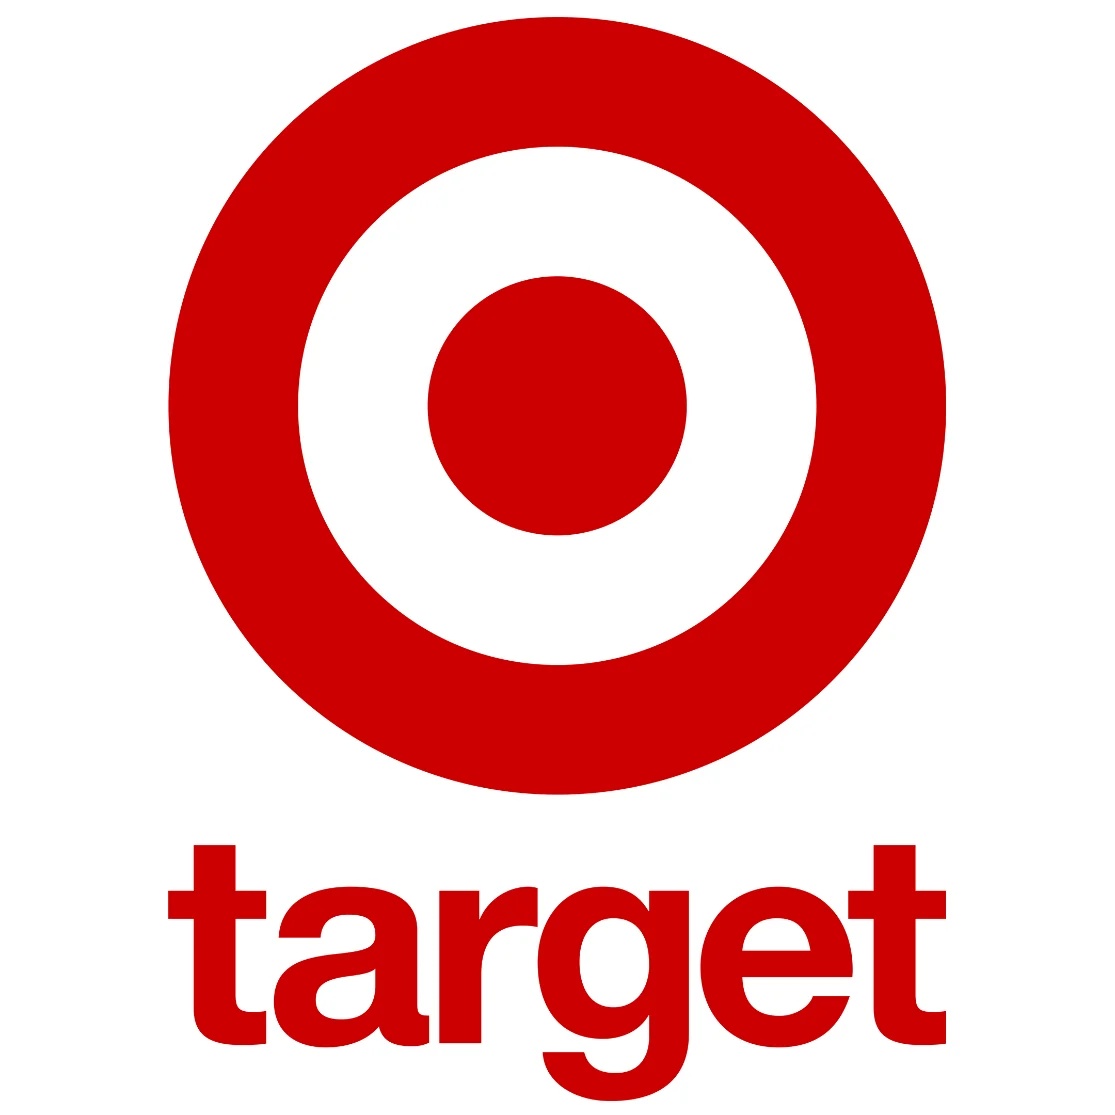 15% Off With This Target Student Discount Code